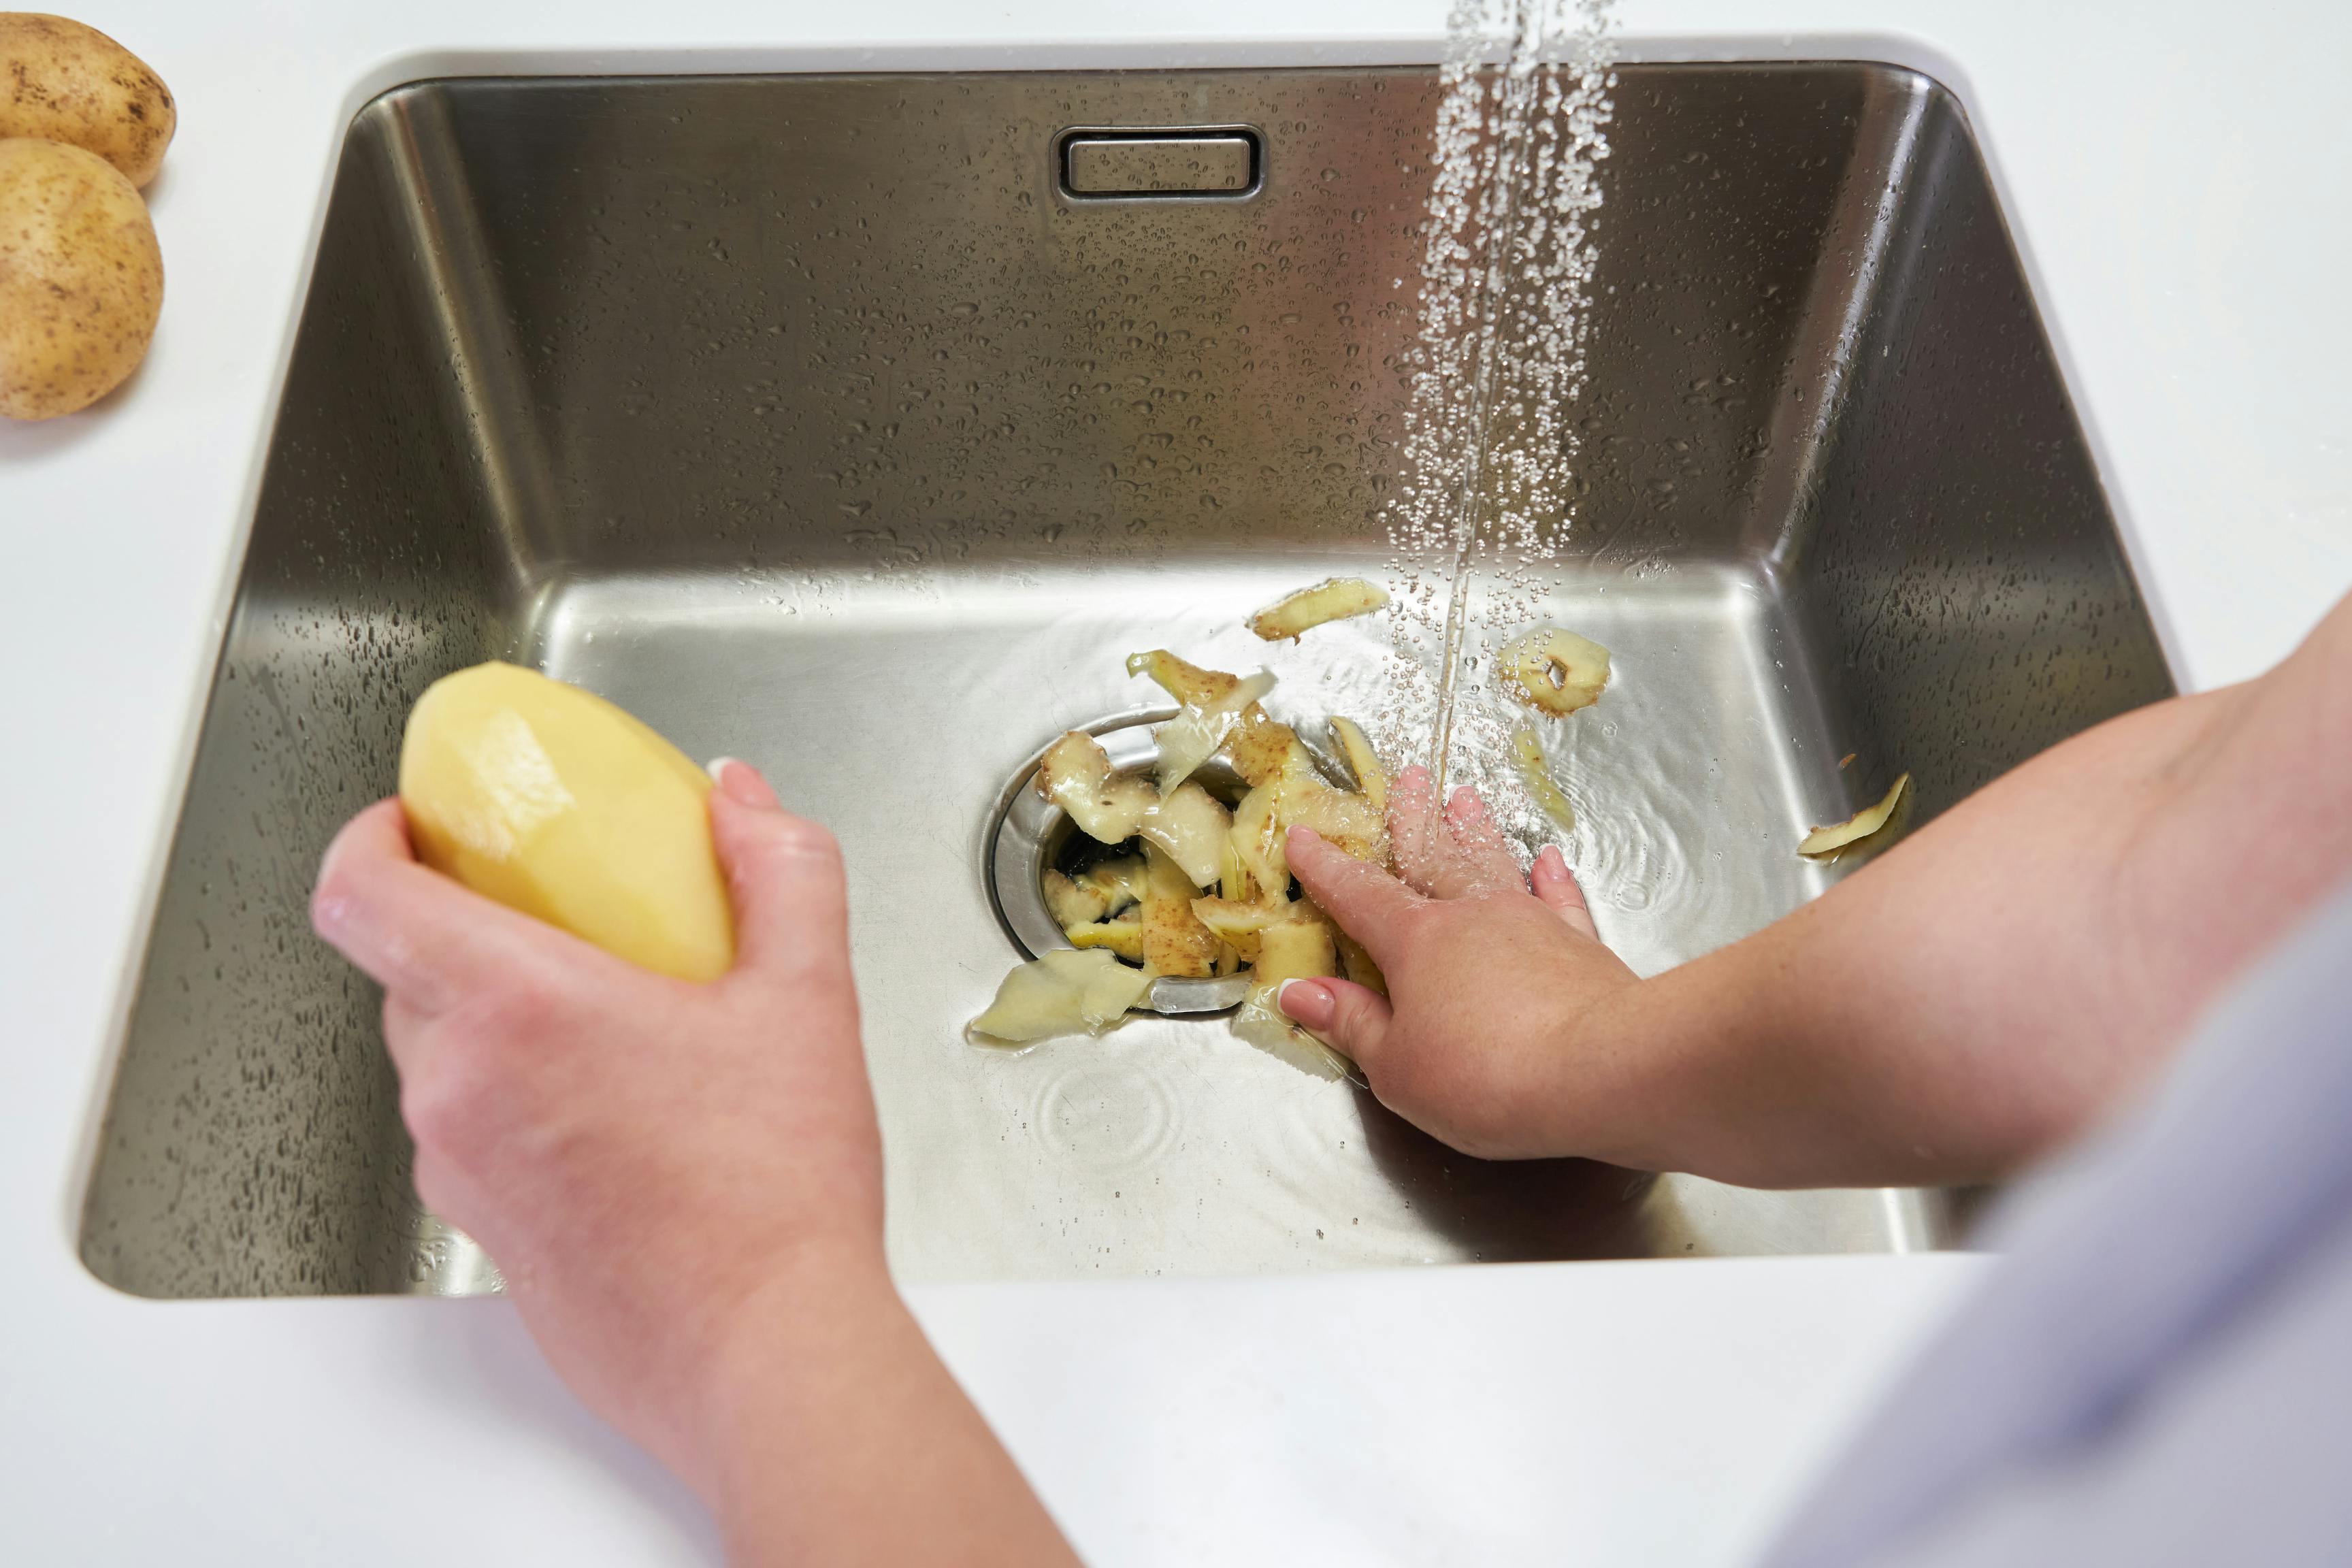 The image shows a white countertop with an inlaid stainless-steel kitchen sink. A woman’s right hand is holding a peeled potato, and her right hand is under a stream of water pushing the potato peels down the sink. To the left of the sink is a partial view of two unpeeled potatoes. This image conveys 9 things that can ruin your garbage disposal, according to plumbers.